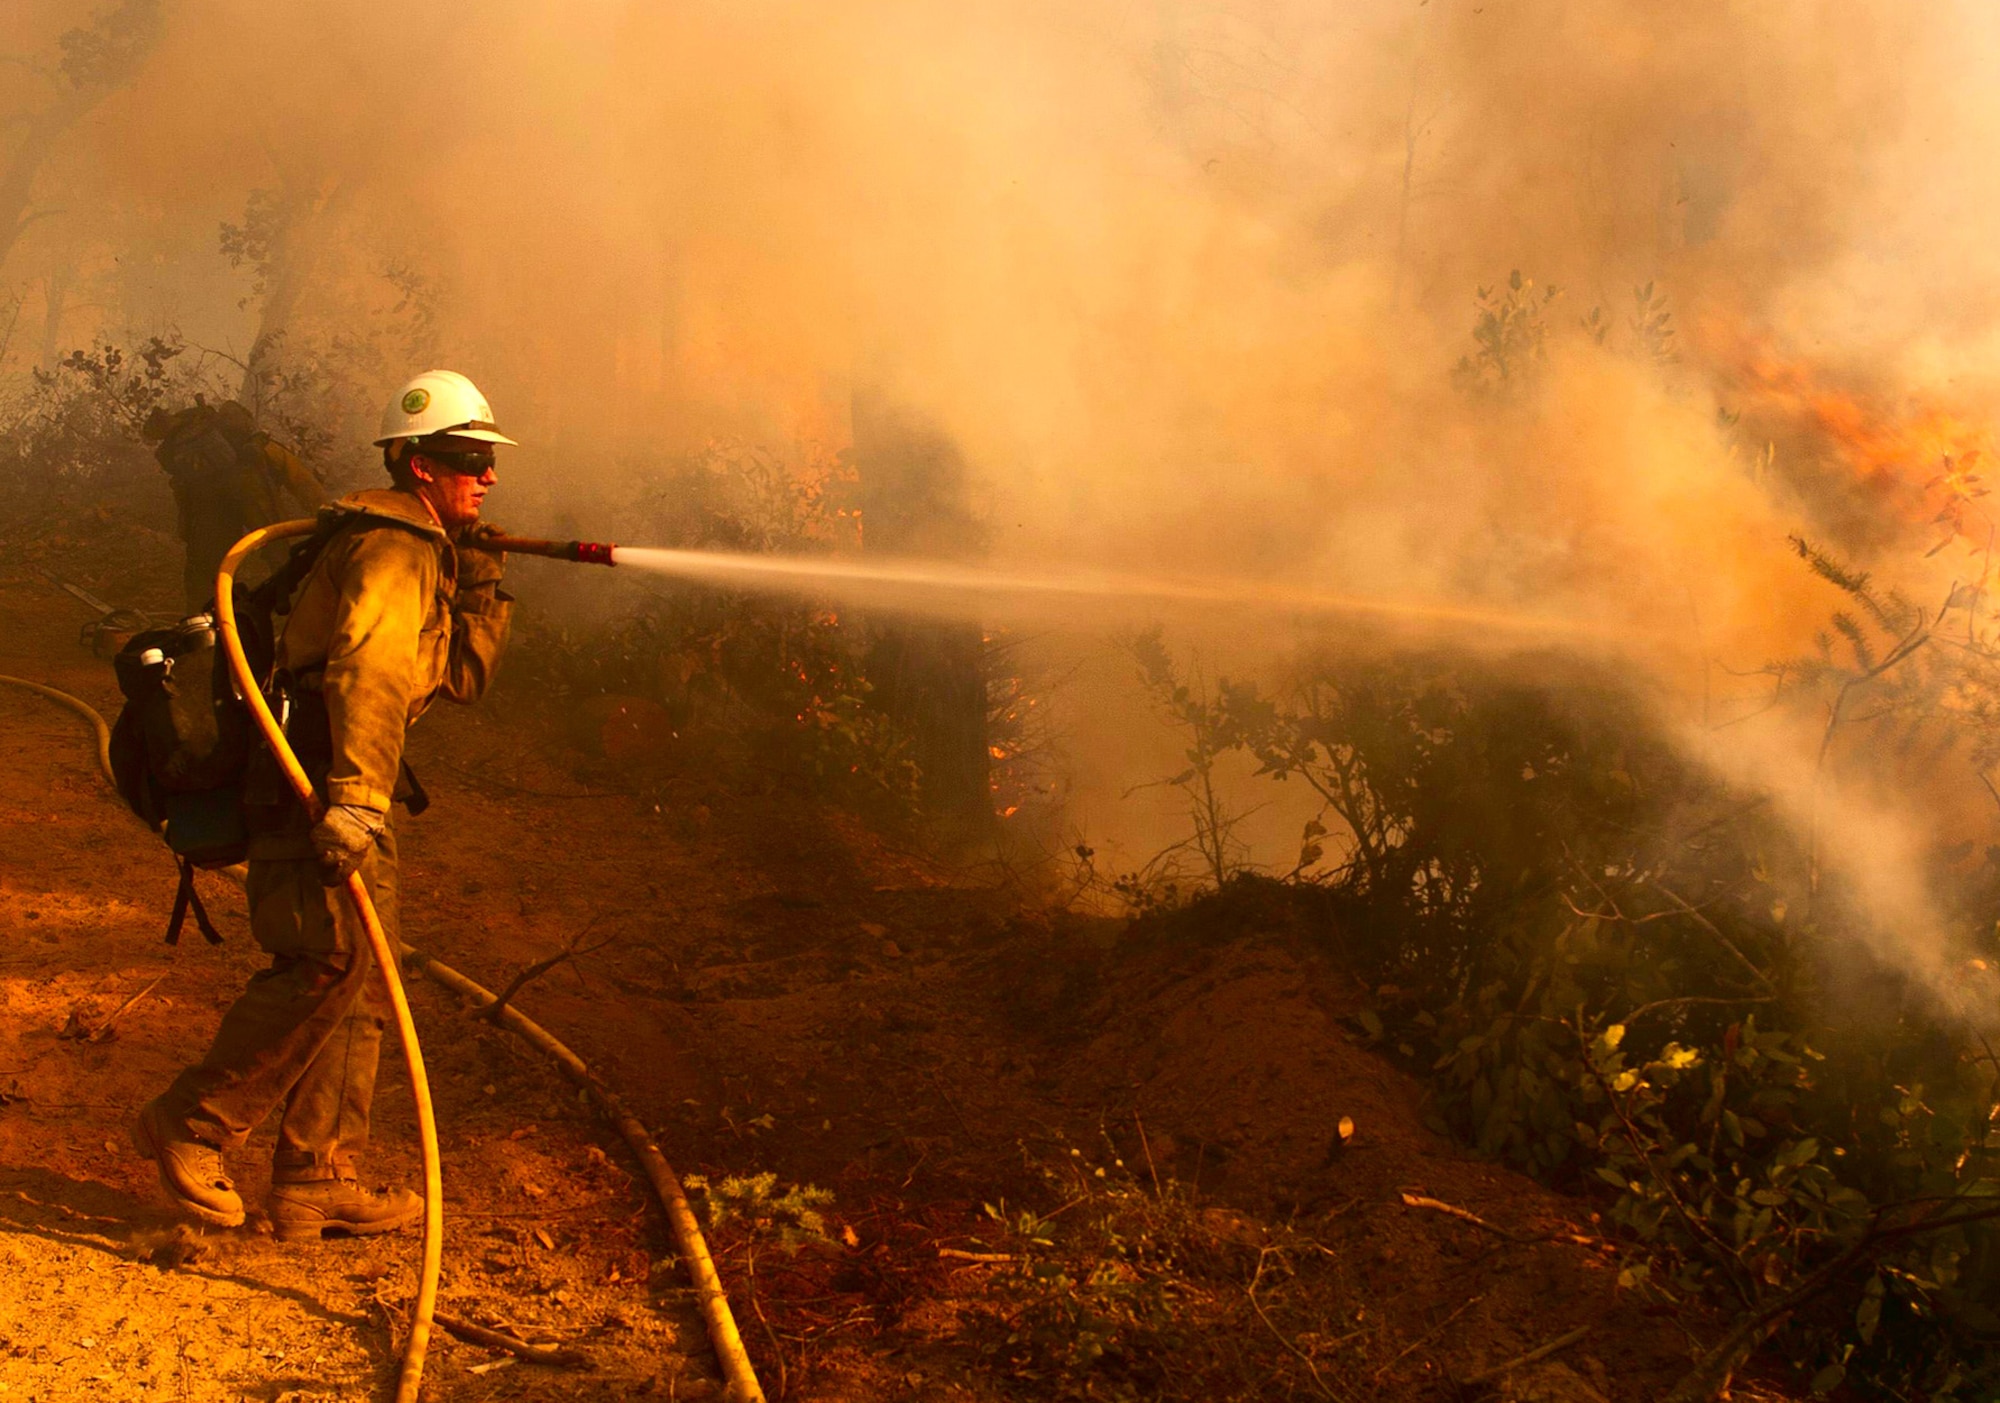 A firefighter suppresses hot spots during the 2014 wildfire season in California. Defense Logistics Agency Troop Support began providing firefighting and other materiel to wildland firefighters with the U.S. Forest Service in 2014. 